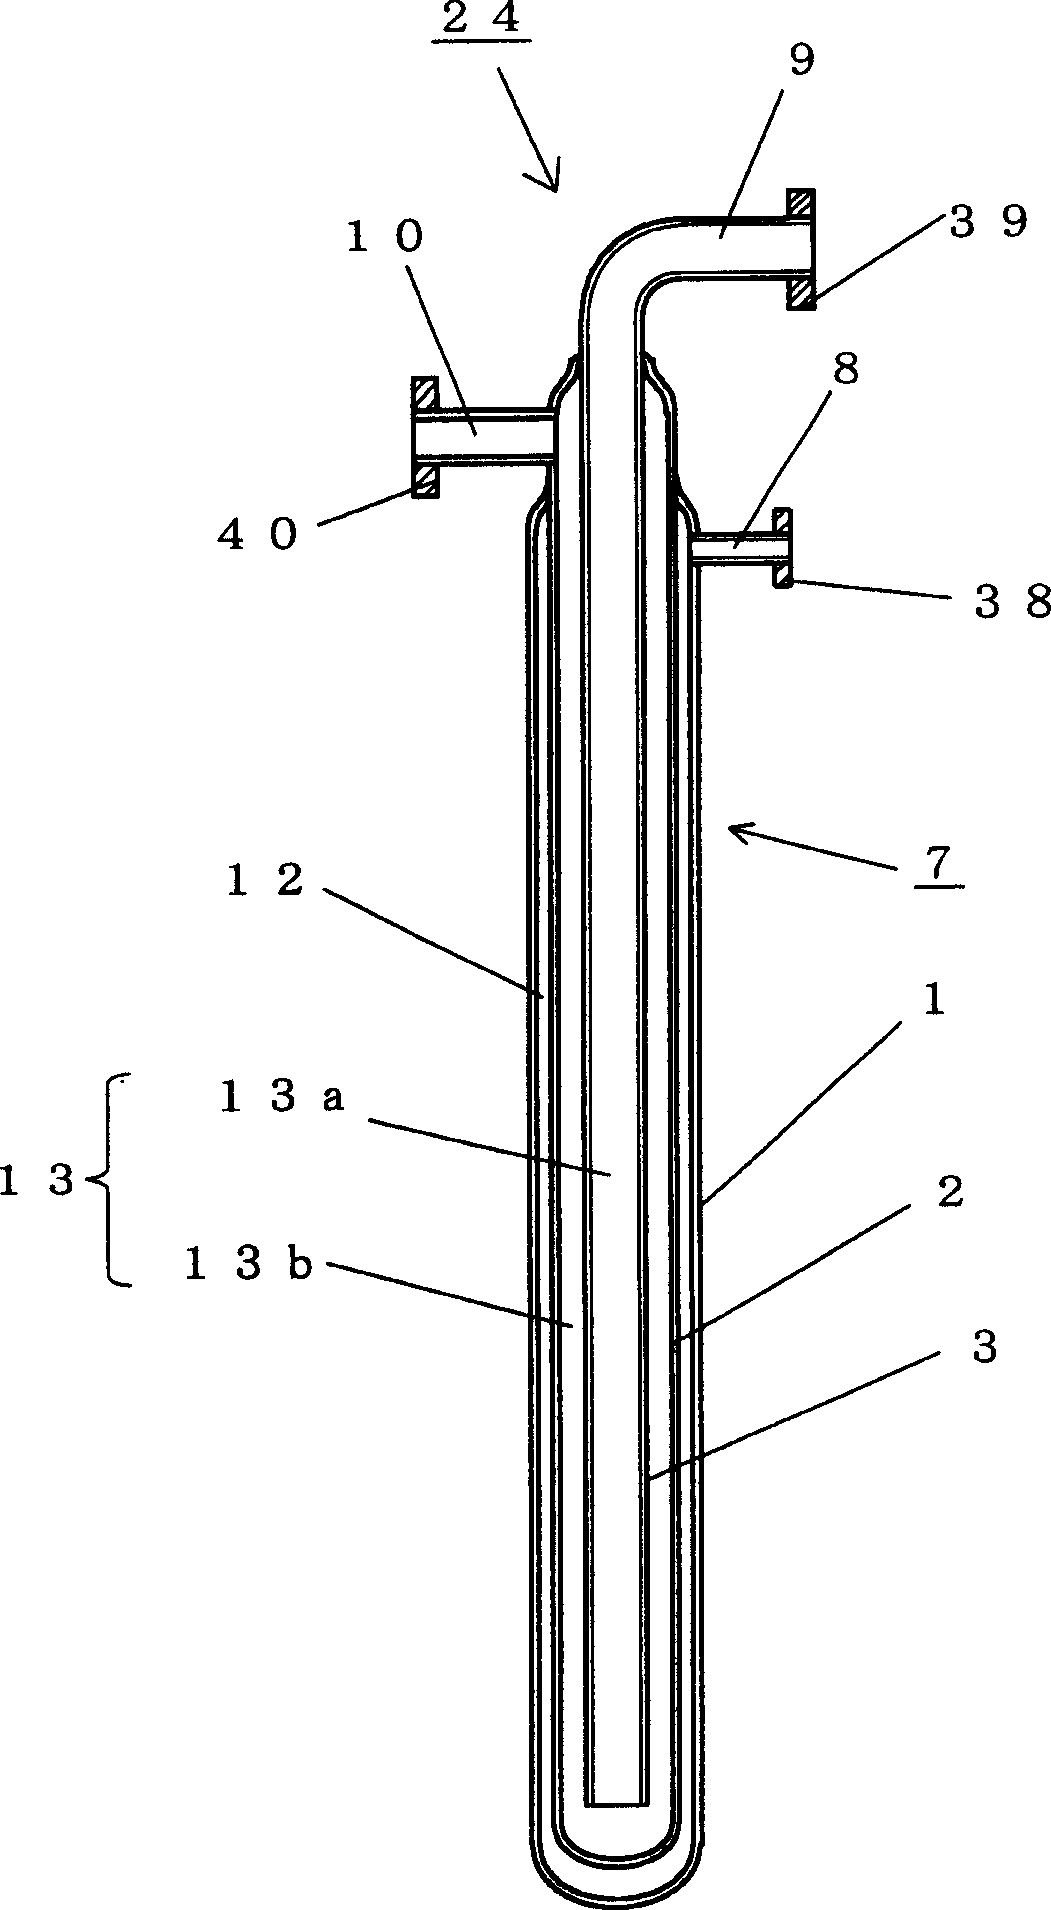 Cooling device and thin strap continuous casting apparatus and cooling method for casting thin strap